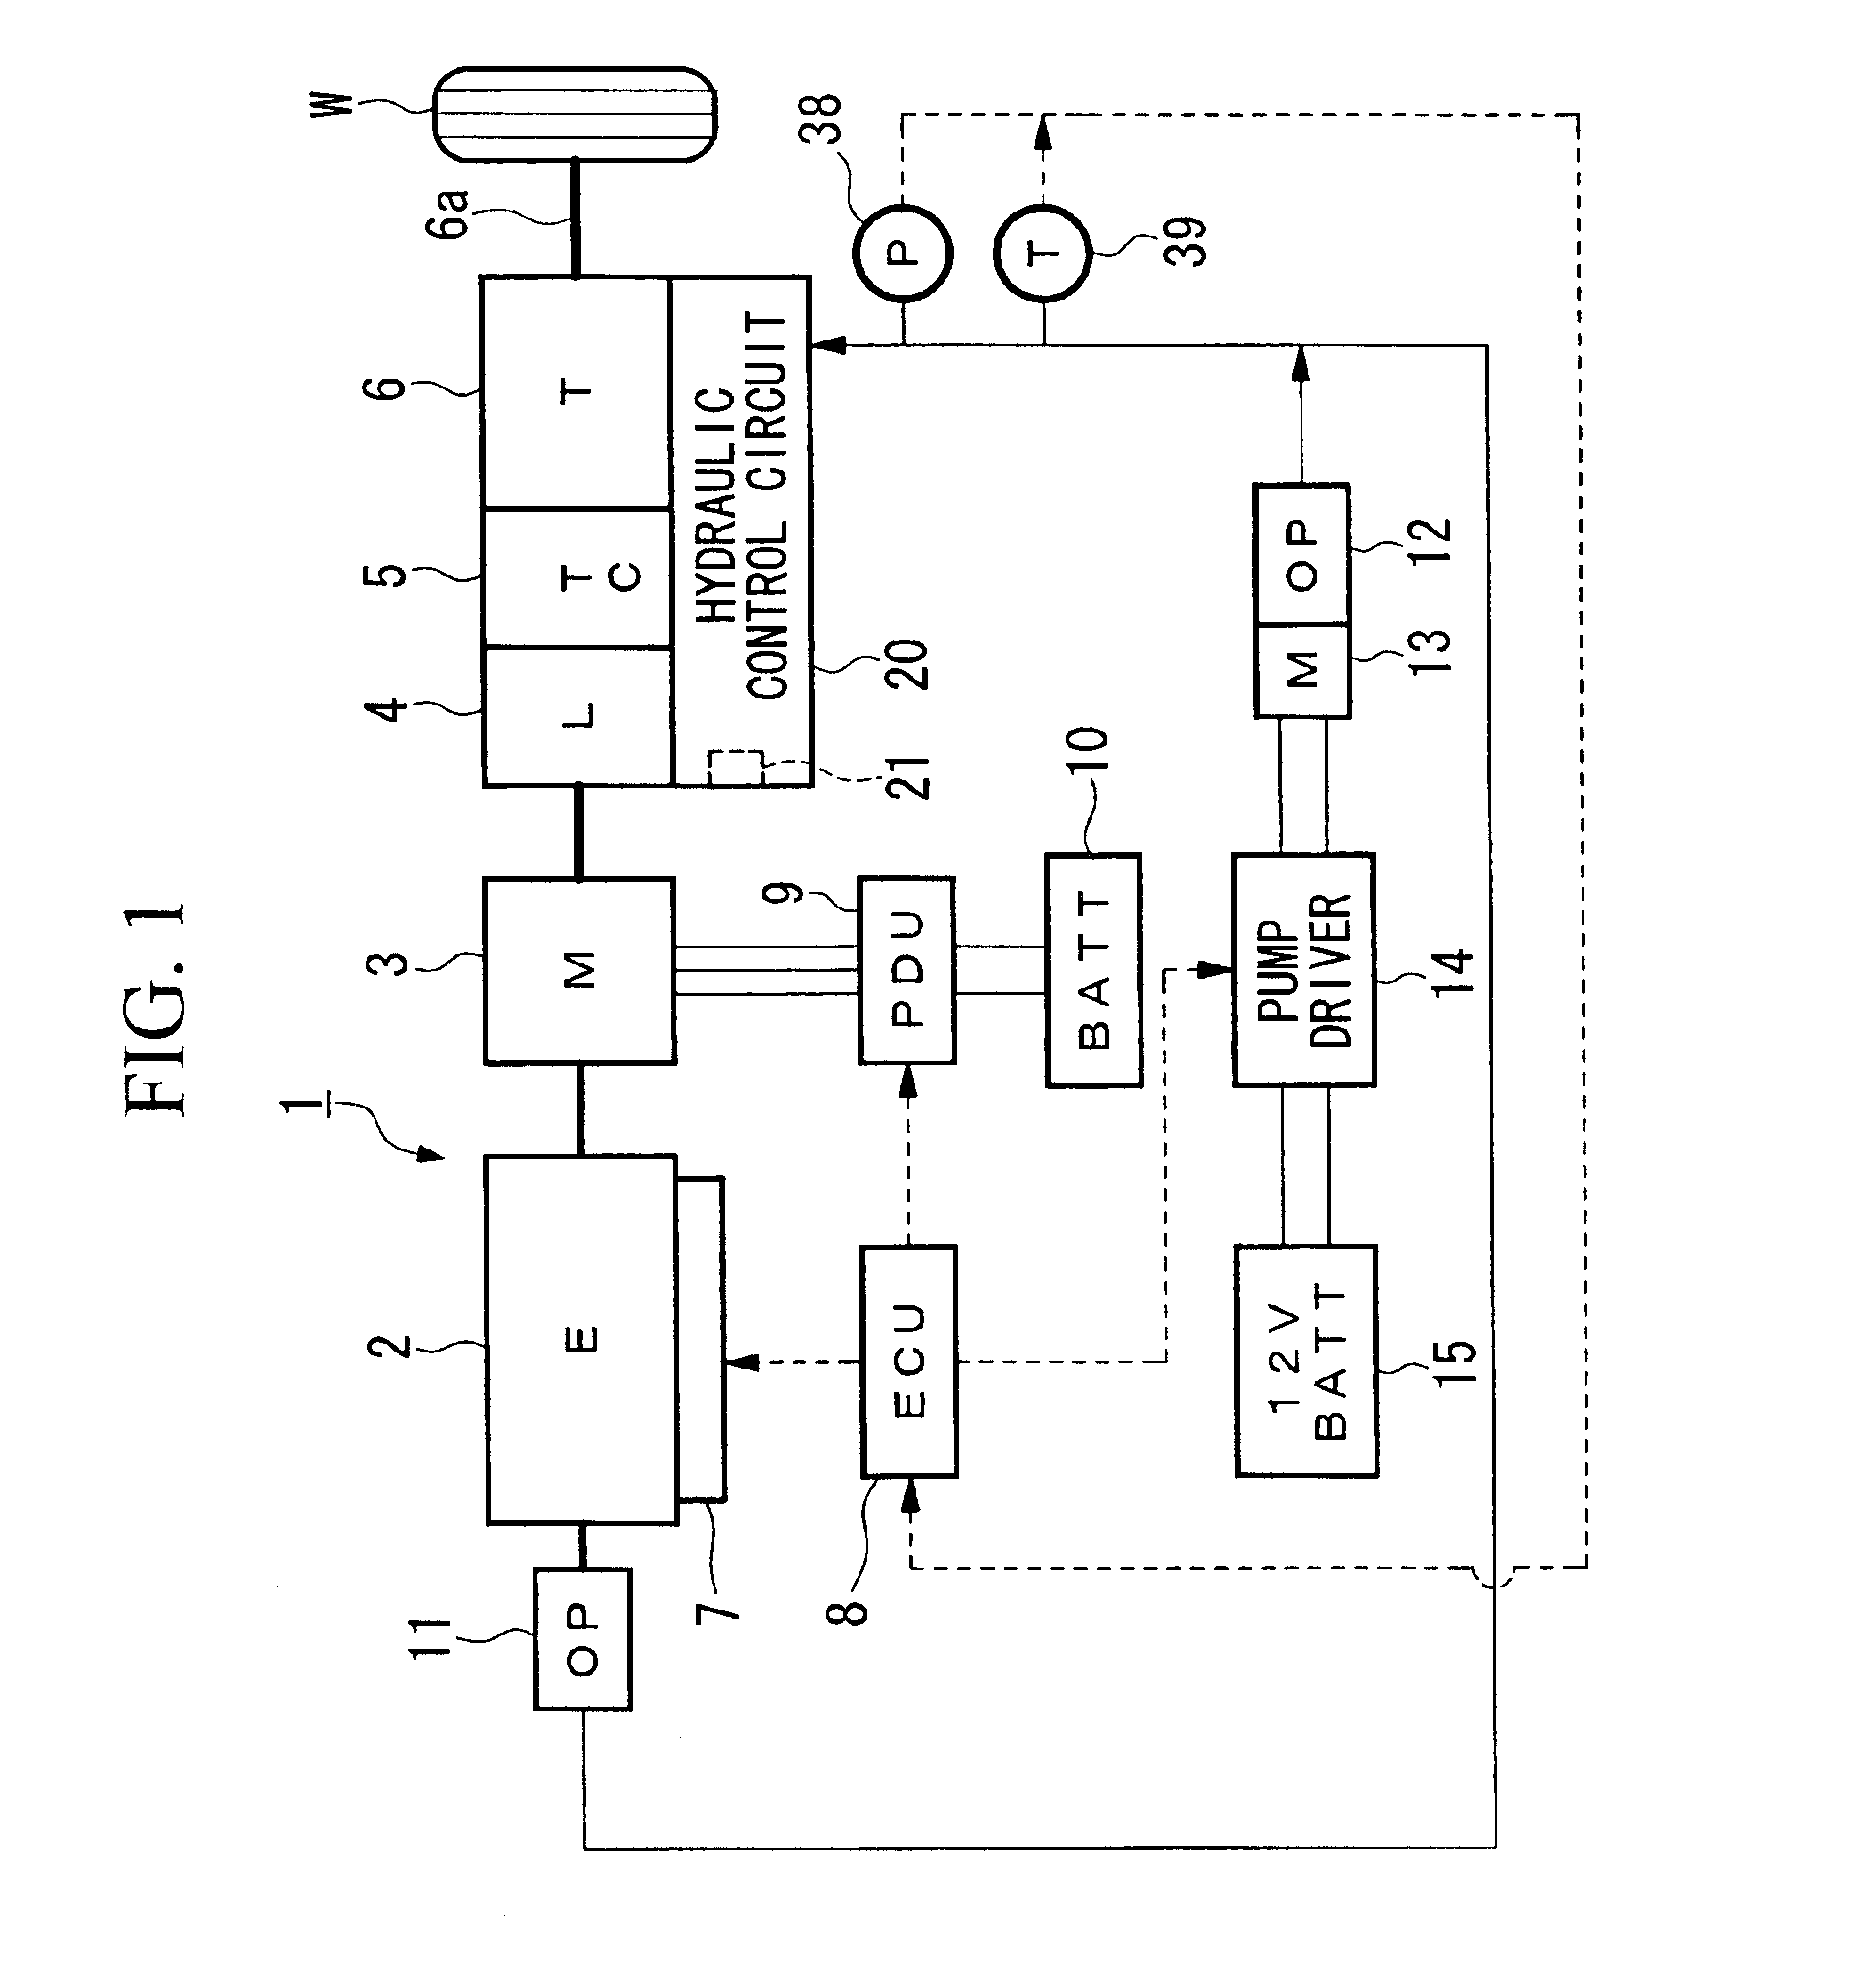 Control system for stopping and starting vehicle engine